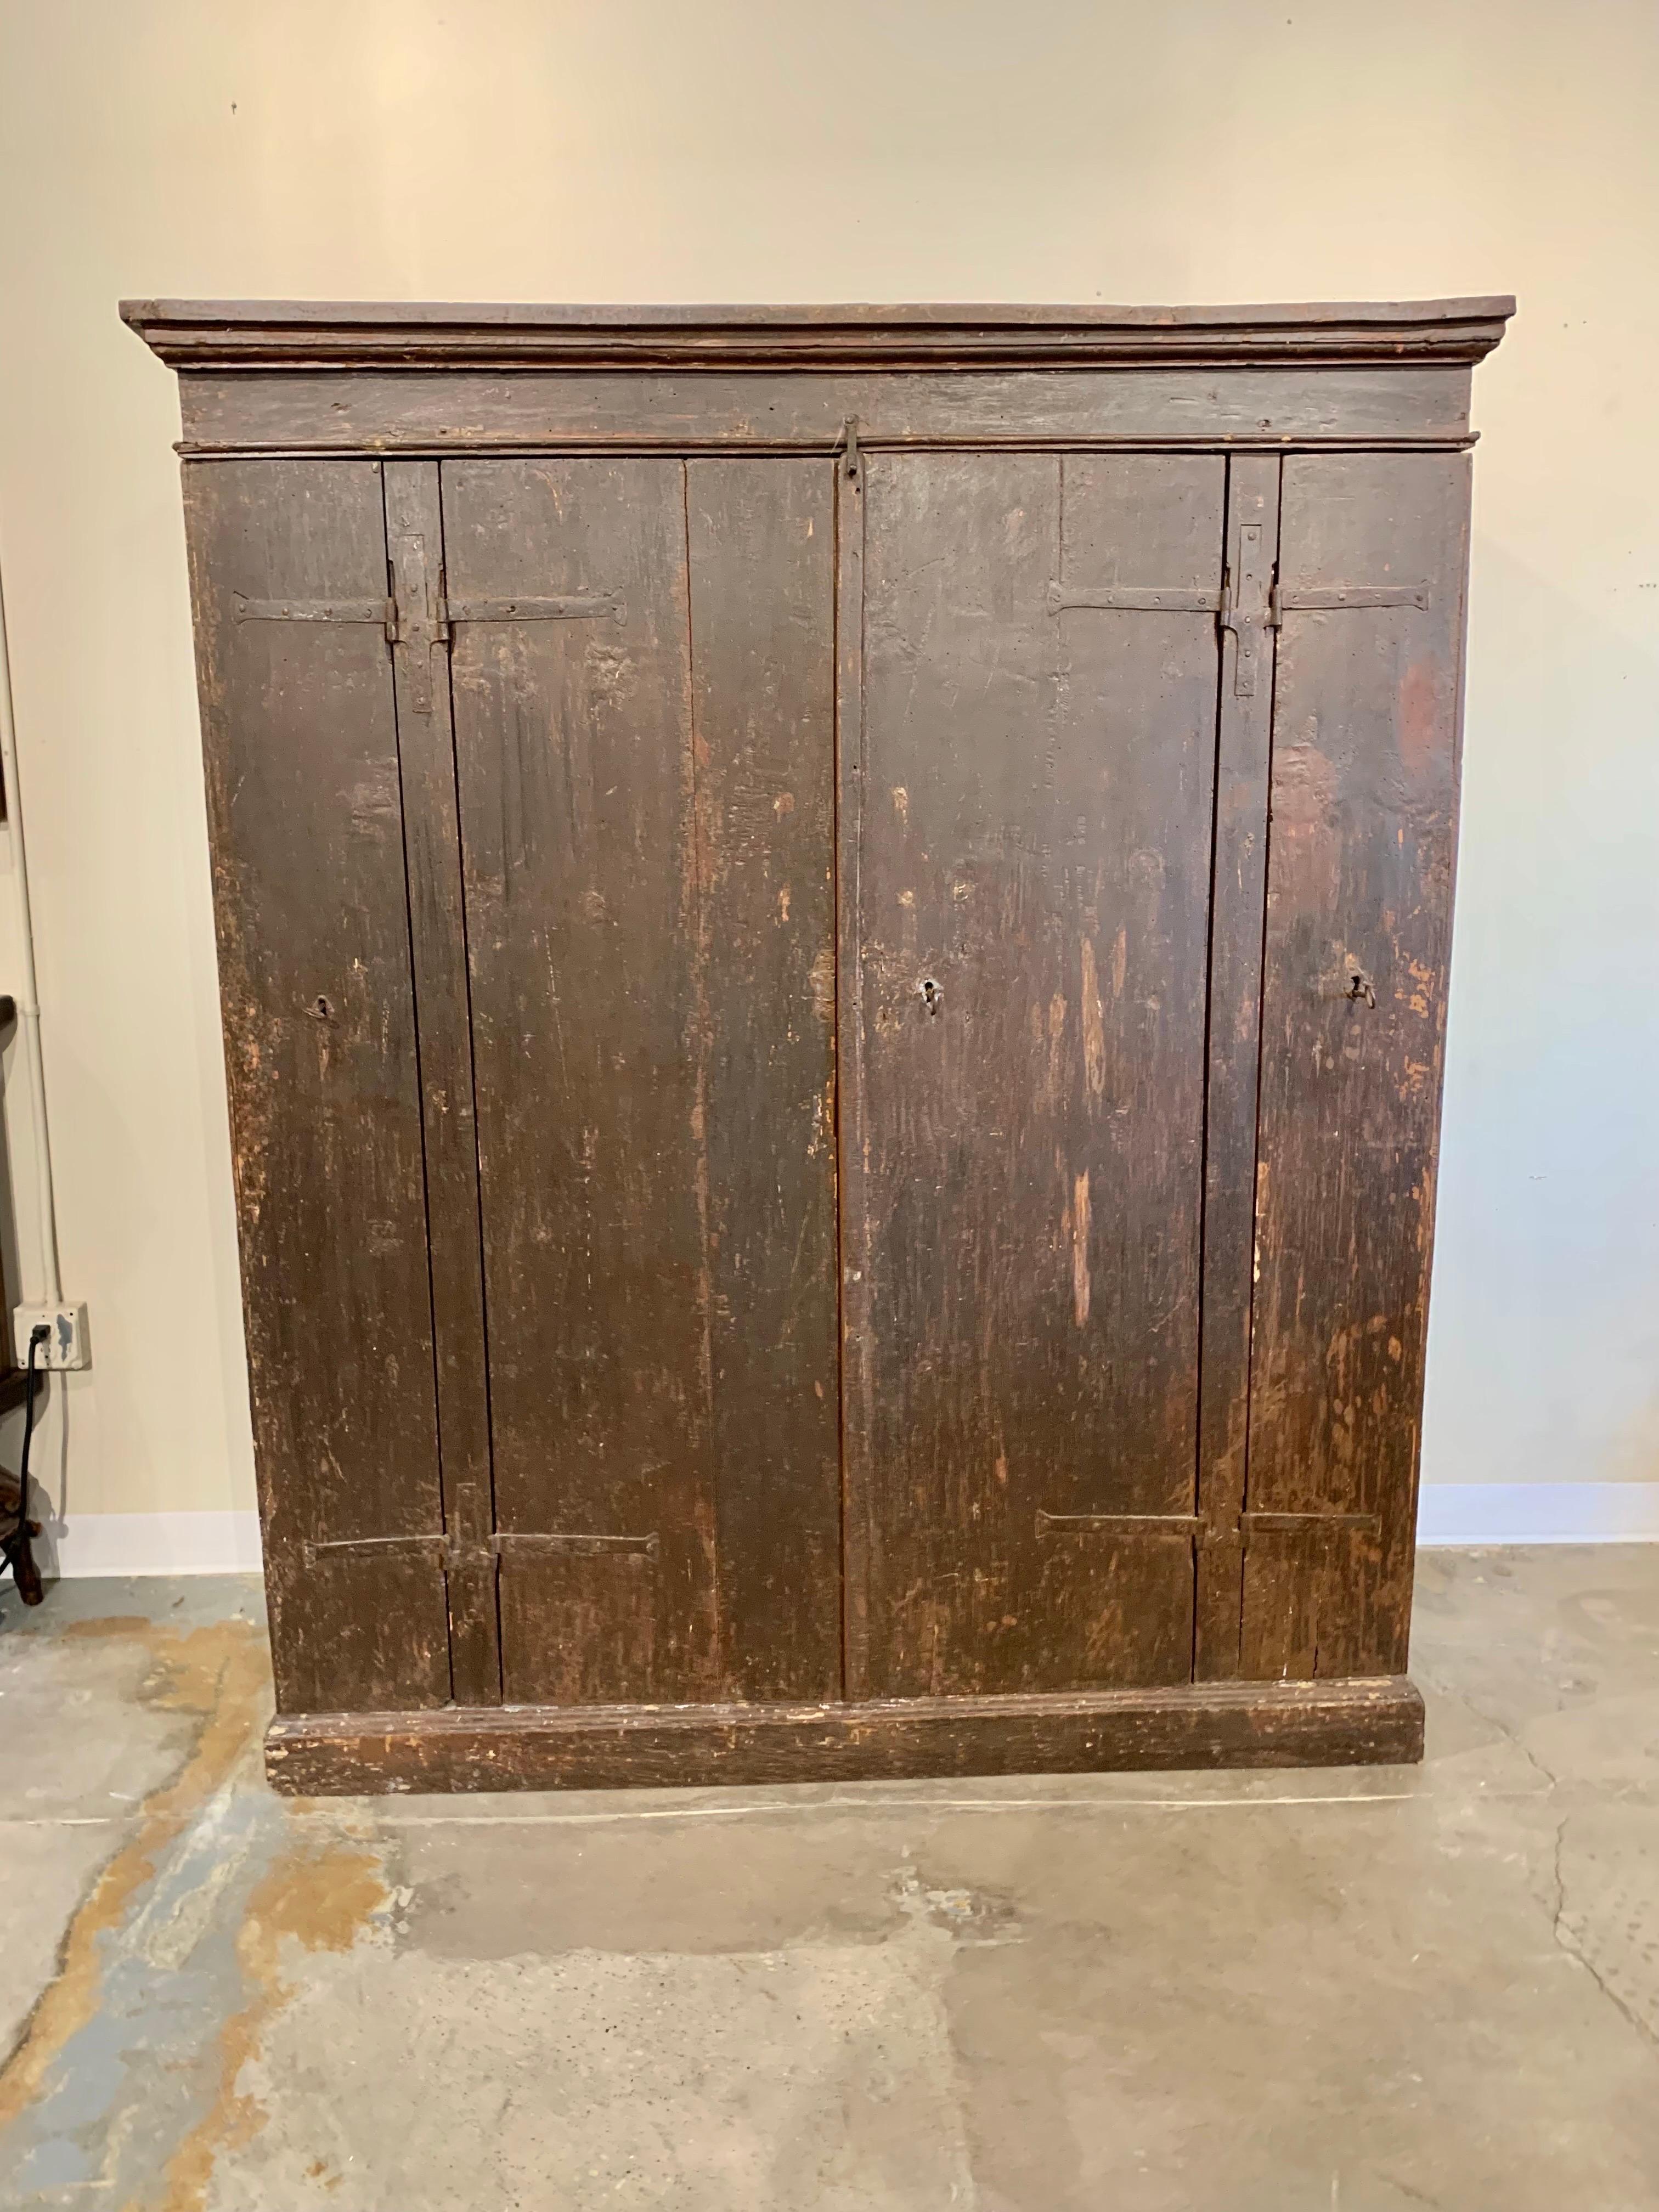 Found in Italy, this 17th Century Four Door Cabinet or Cupboard once graced an Italian countryside villa.  Hand crafted from old growth pine and forged iron hardware the piece features two large center doors and two smaller doors on each side.  The